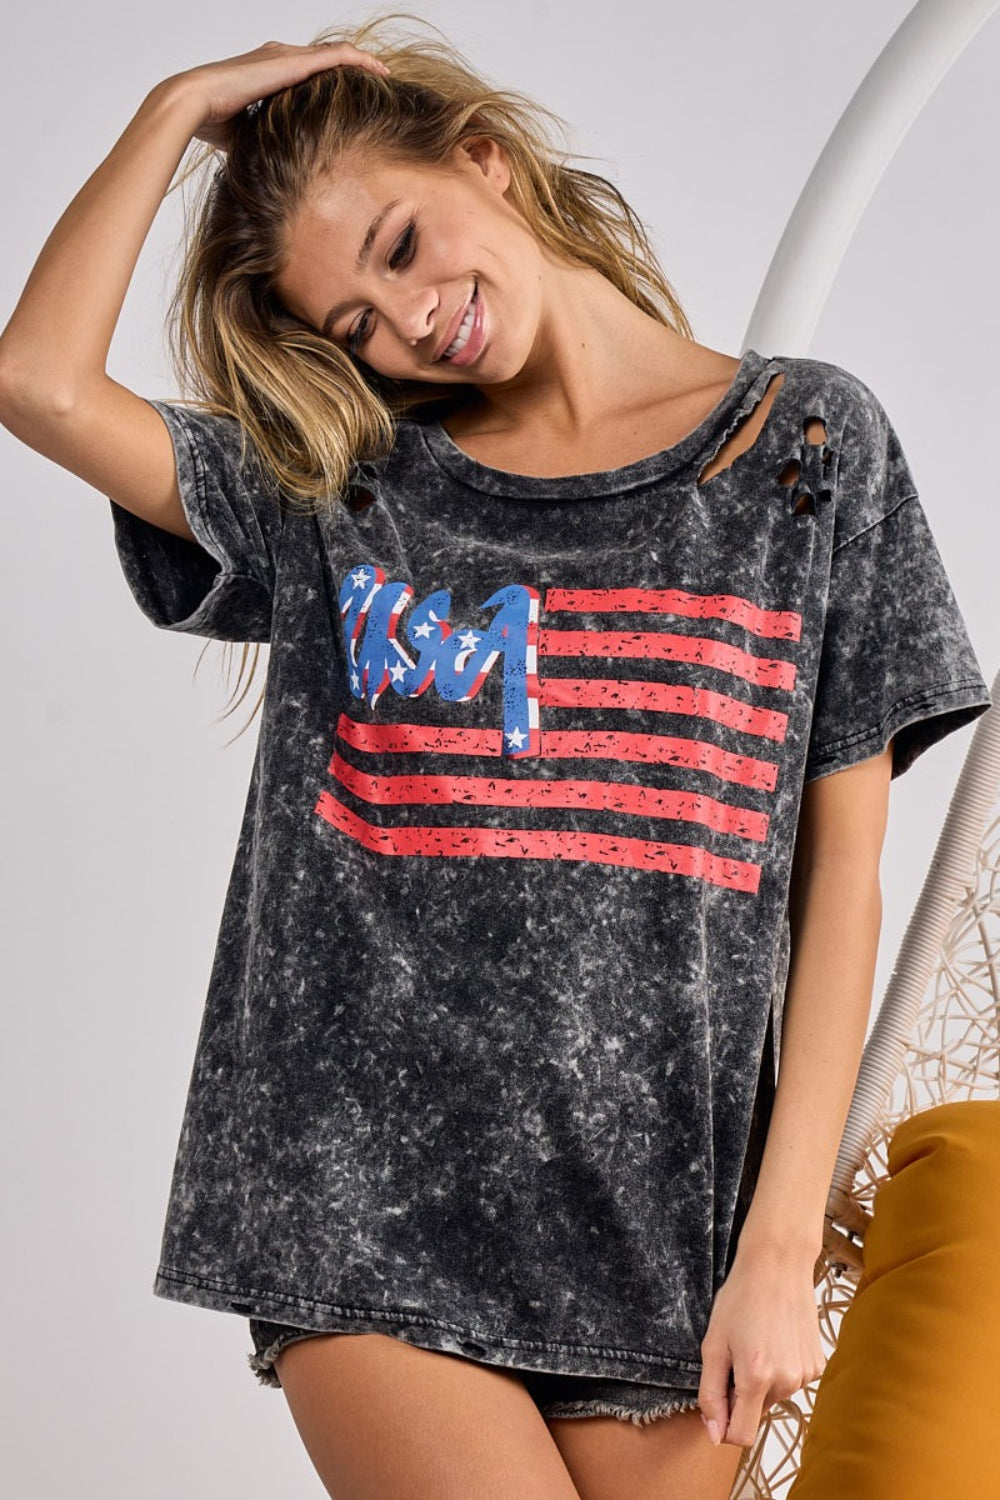 Smiling woman in a trendy American flag-themed t-shirt, embodying a casual and patriotic style.